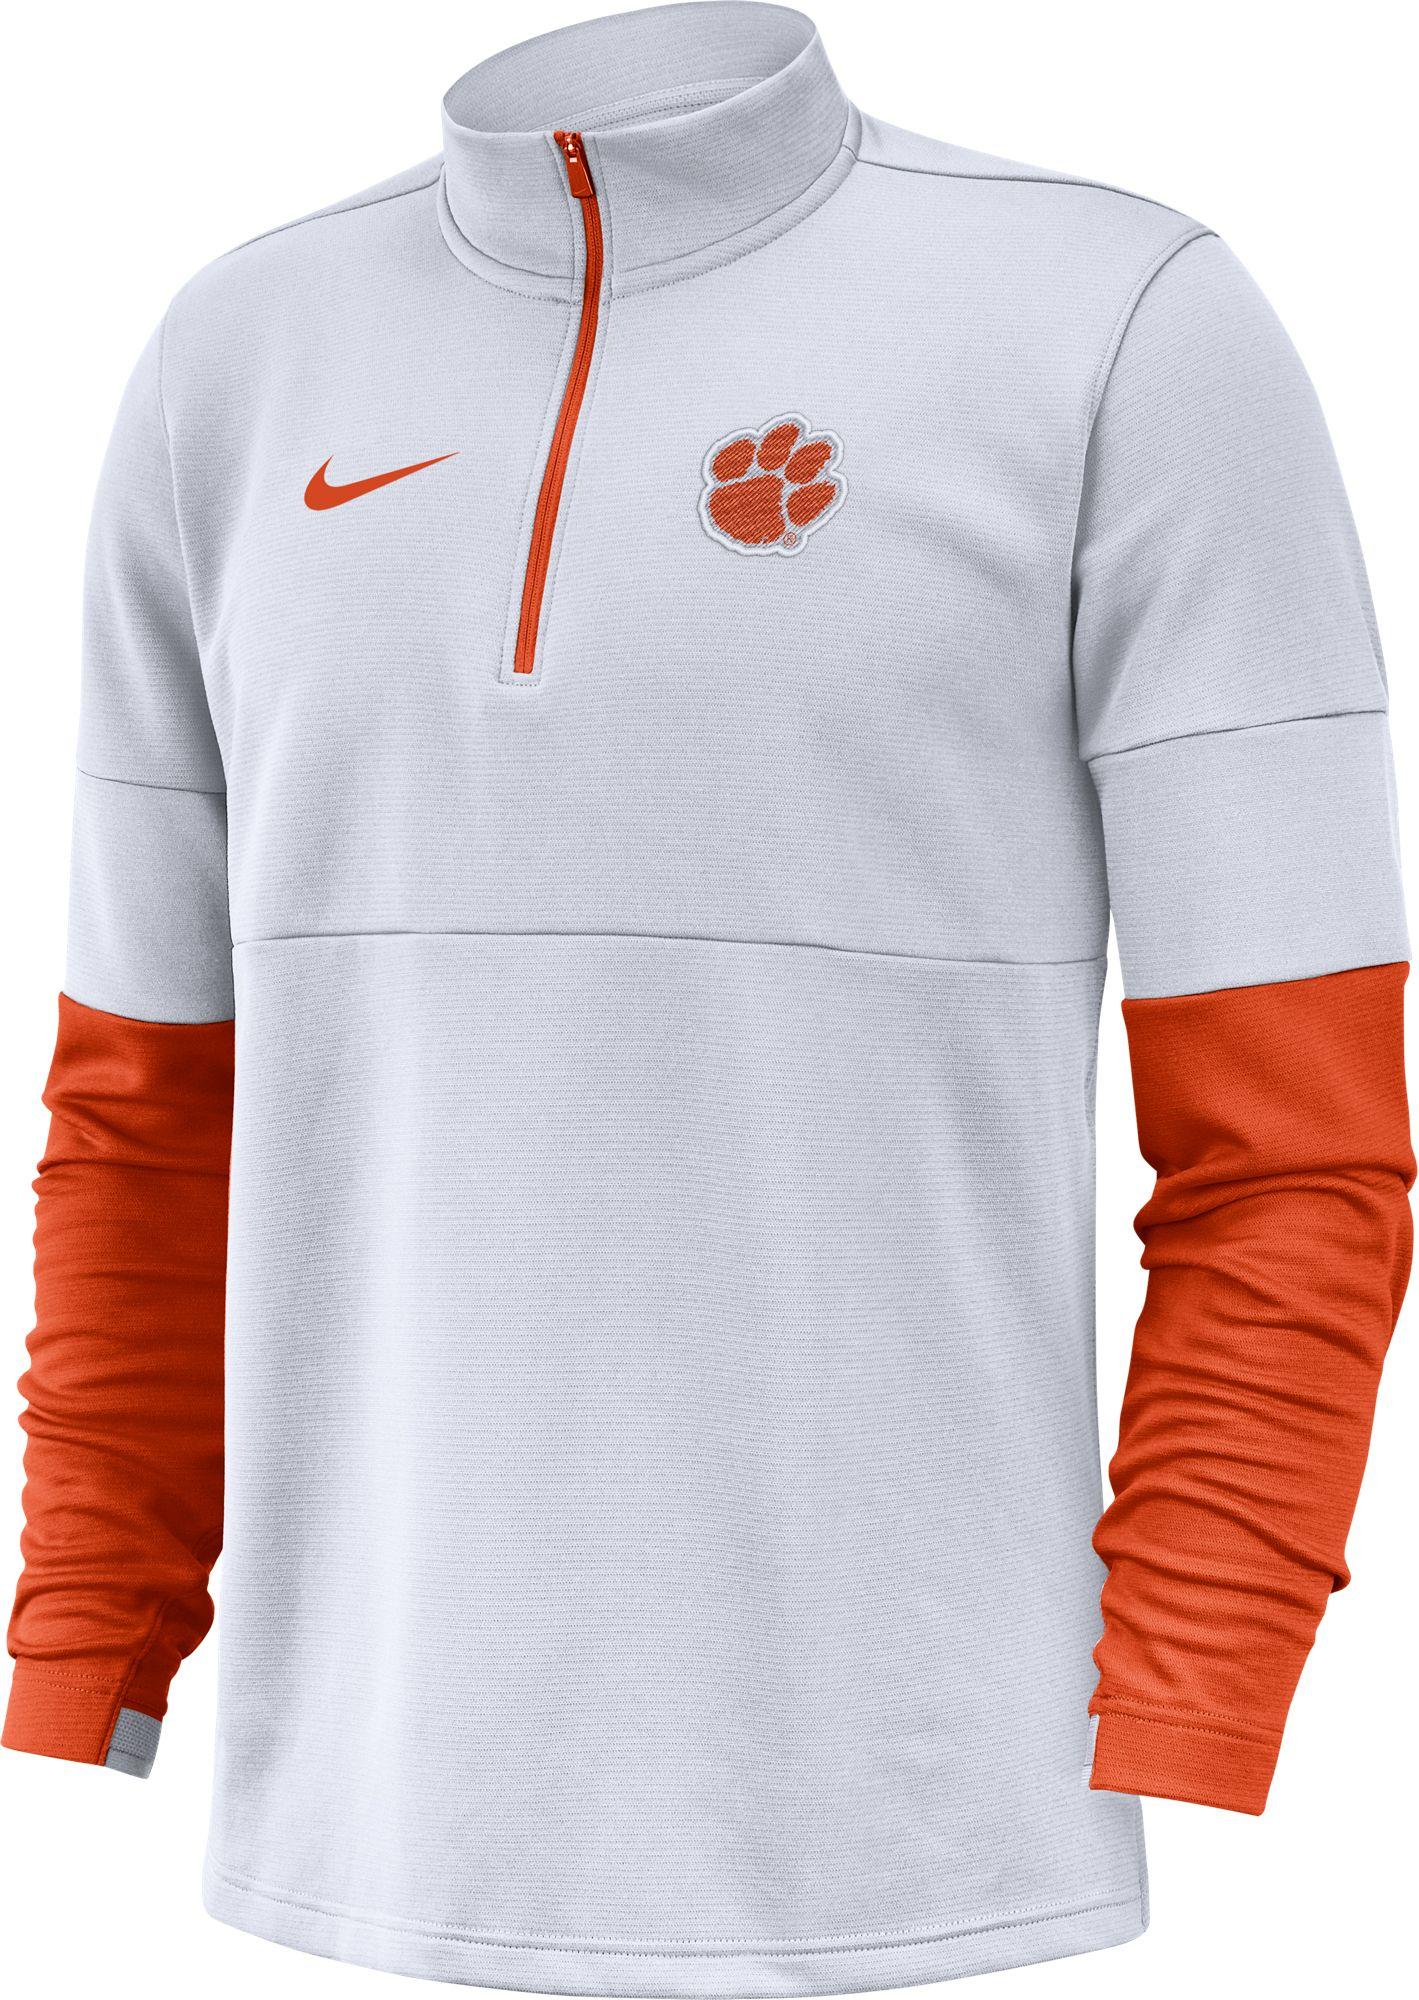 Download Nike Fleece Clemson Tigers Football Sideline Therma-fit ...